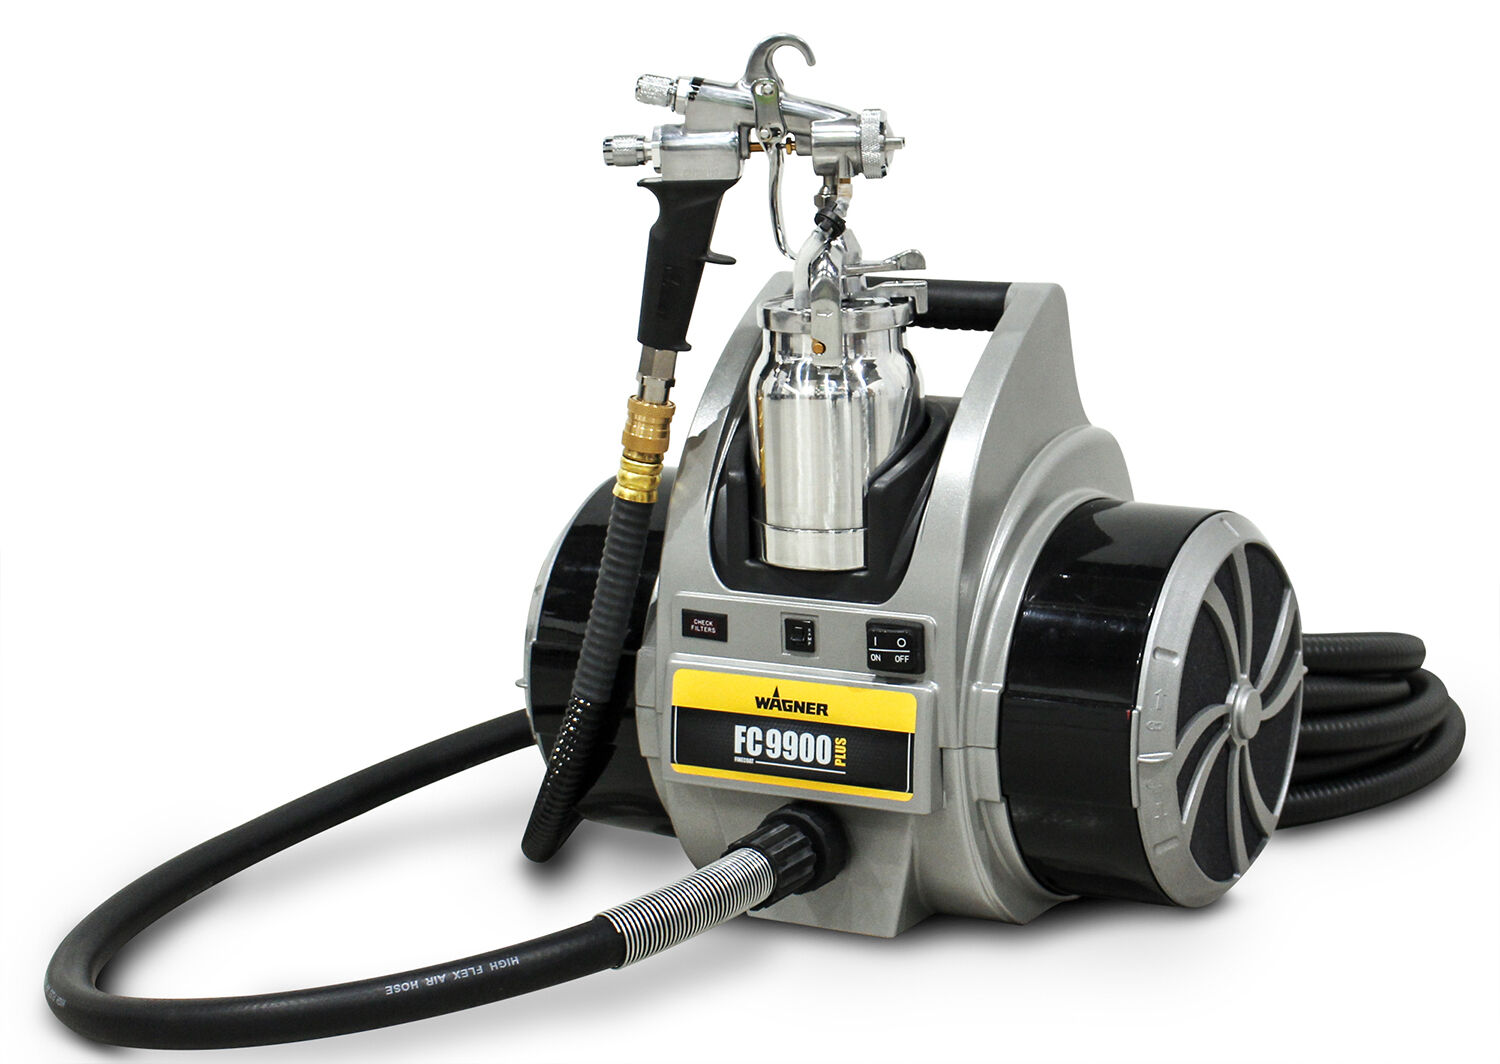 Turbine Paint Sprayers: how they WAGNER and advantages applications | work